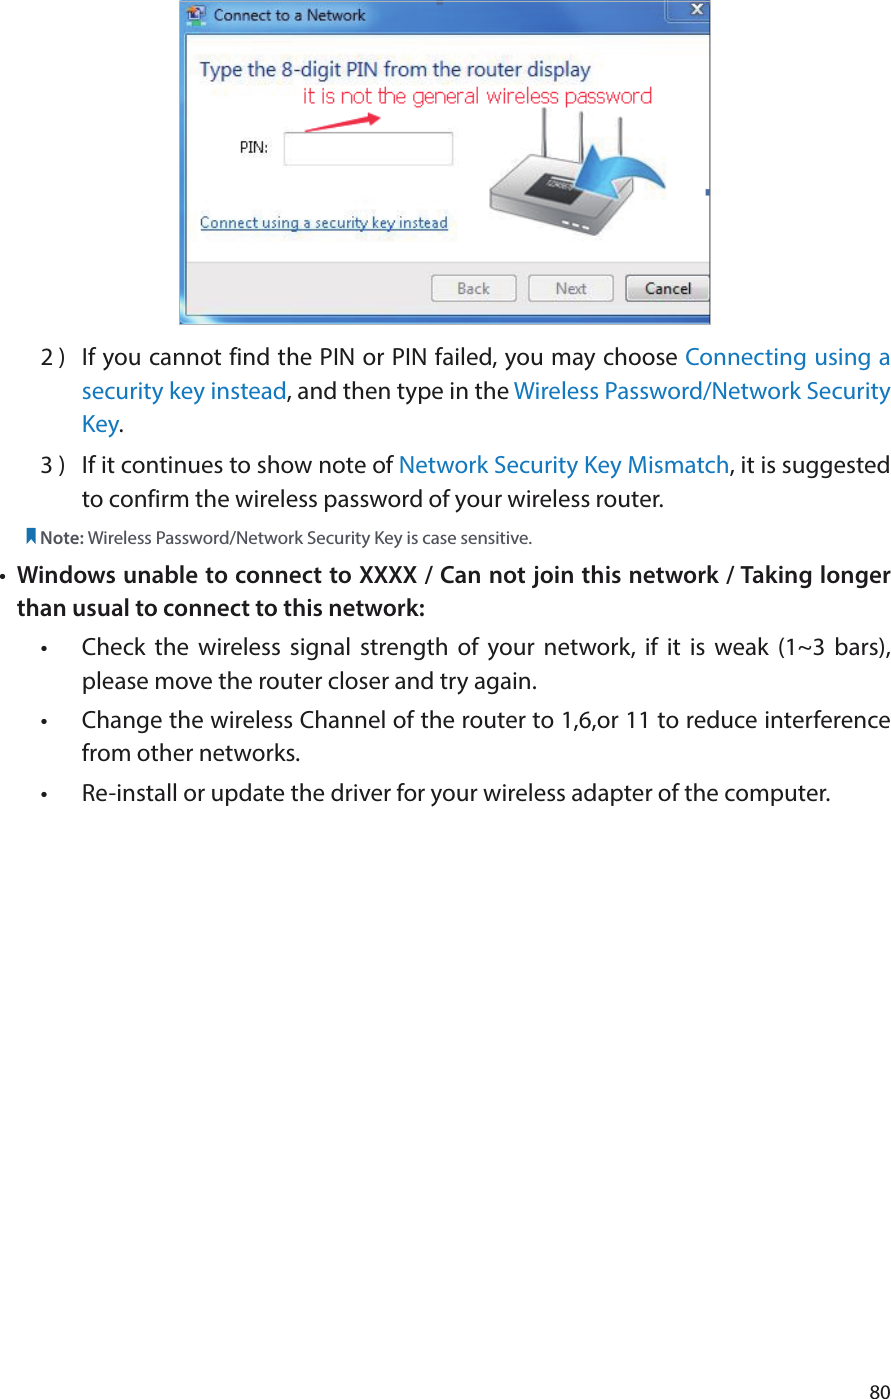 802 )  If you cannot find the PIN or PIN failed, you may choose Connecting using a security key instead, and then type in the Wireless Password/Network Security Key.3 )  If it continues to show note of Network Security Key Mismatch, it is suggested to confirm the wireless password of your wireless router.  Note: Wireless Password/Network Security Key is case sensitive.•  Windows unable to connect to XXXX / Can not join this network / Taking longer than usual to connect to this network:•  Check the wireless signal strength of your network, if it is weak (1~3 bars), please move the router closer and try again.•  Change the wireless Channel of the router to 1,6,or 11 to reduce interference from other networks.•  Re-install or update the driver for your wireless adapter of the computer.